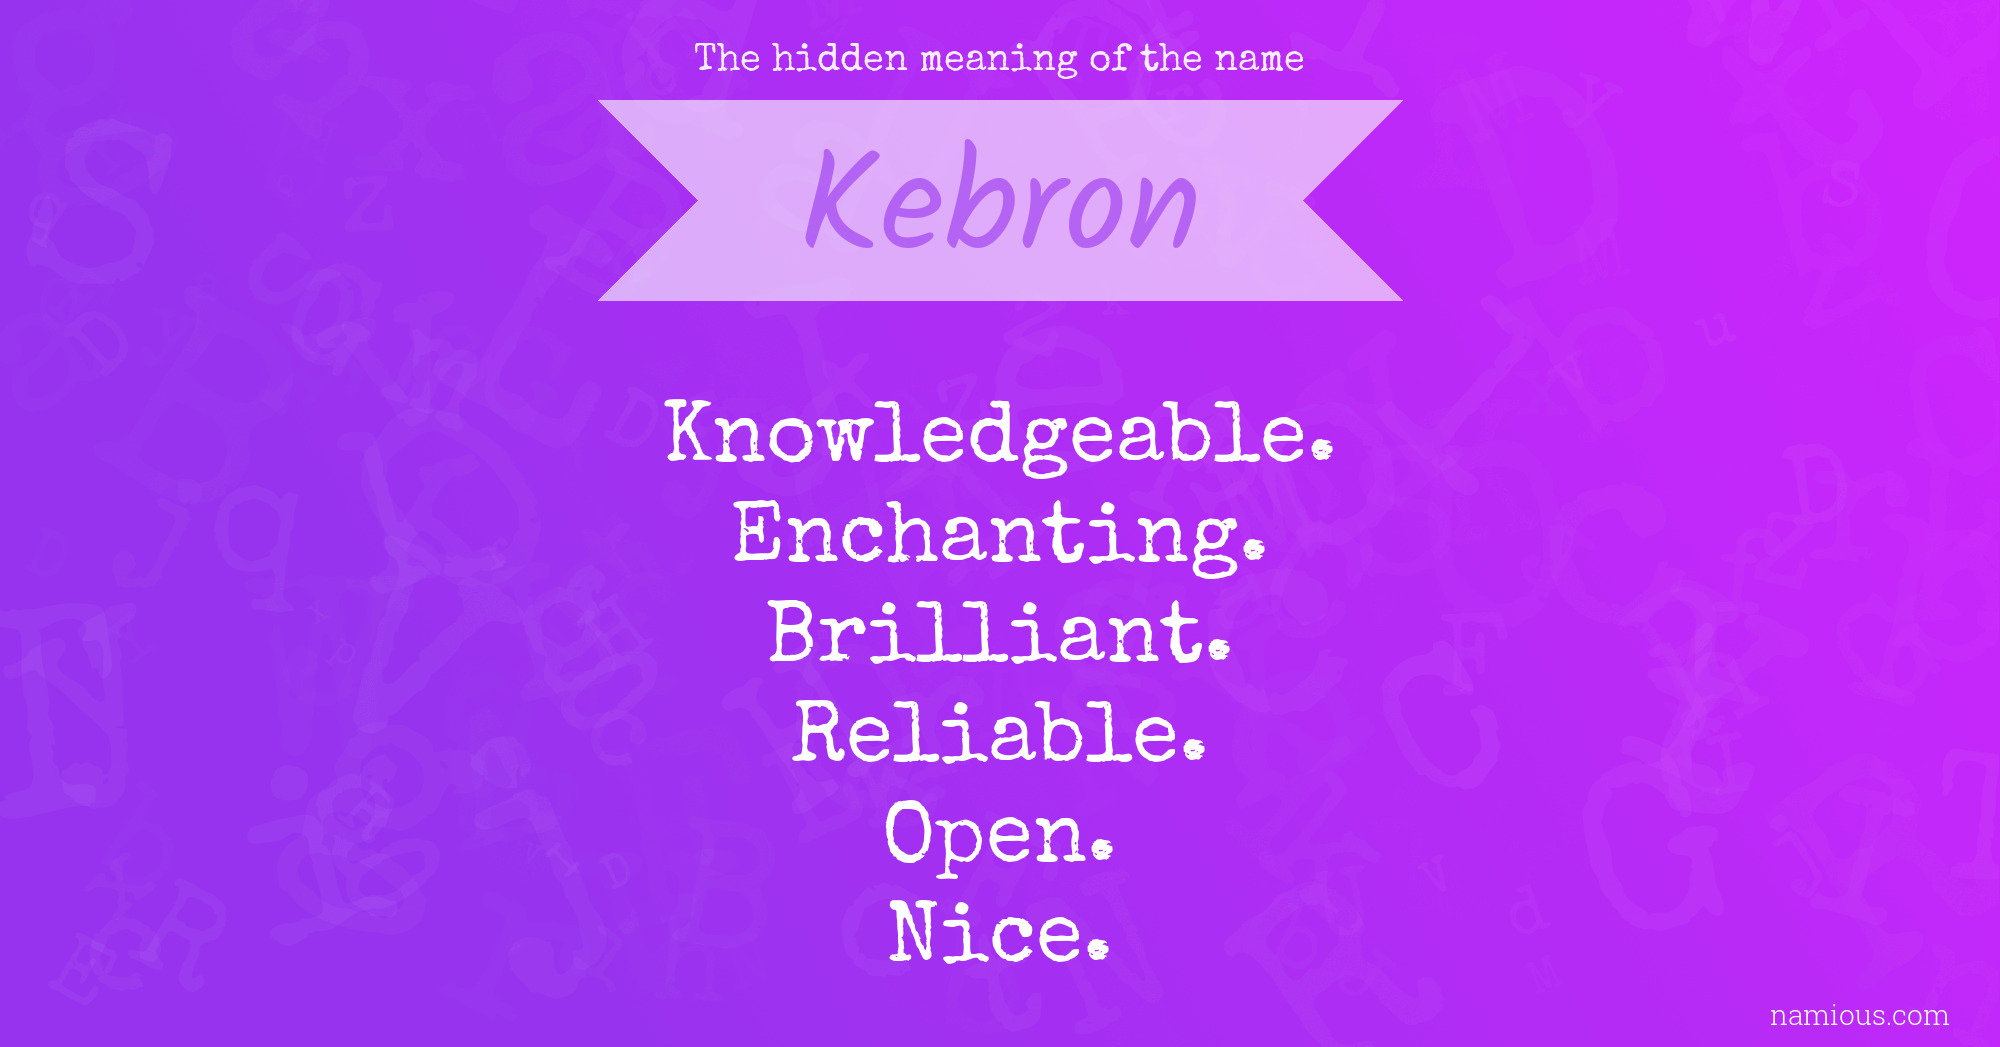 The hidden meaning of the name Kebron